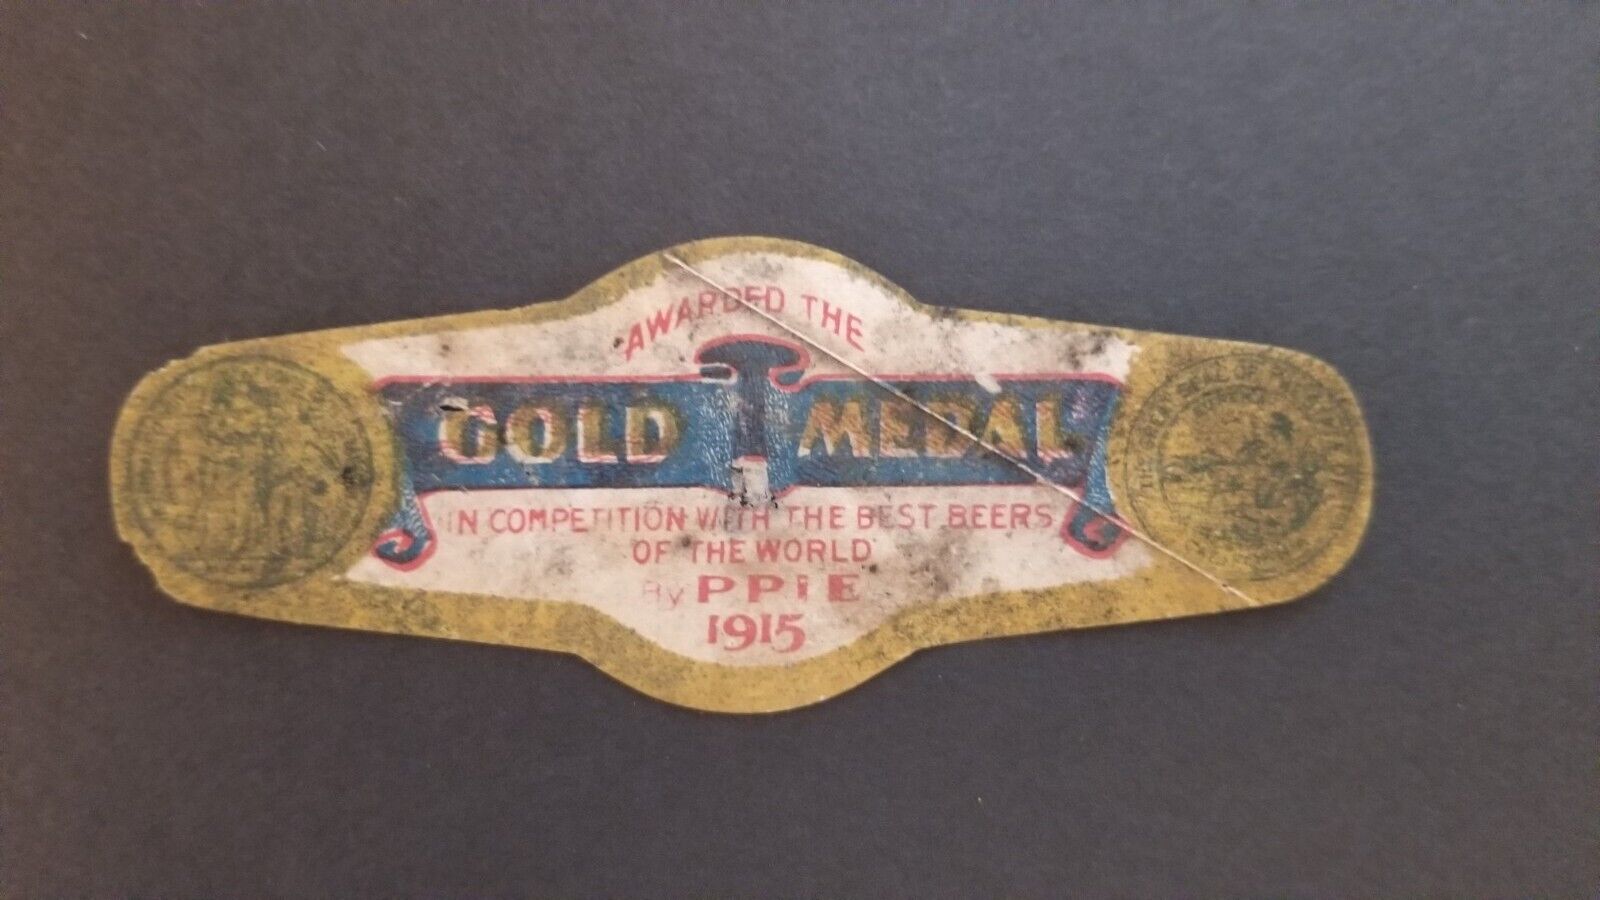 PRE PRO 1915 PAN PACIFIC VALLEY BREW GOLD MEDAL NECK LABEL, STOCKTON, CAL.